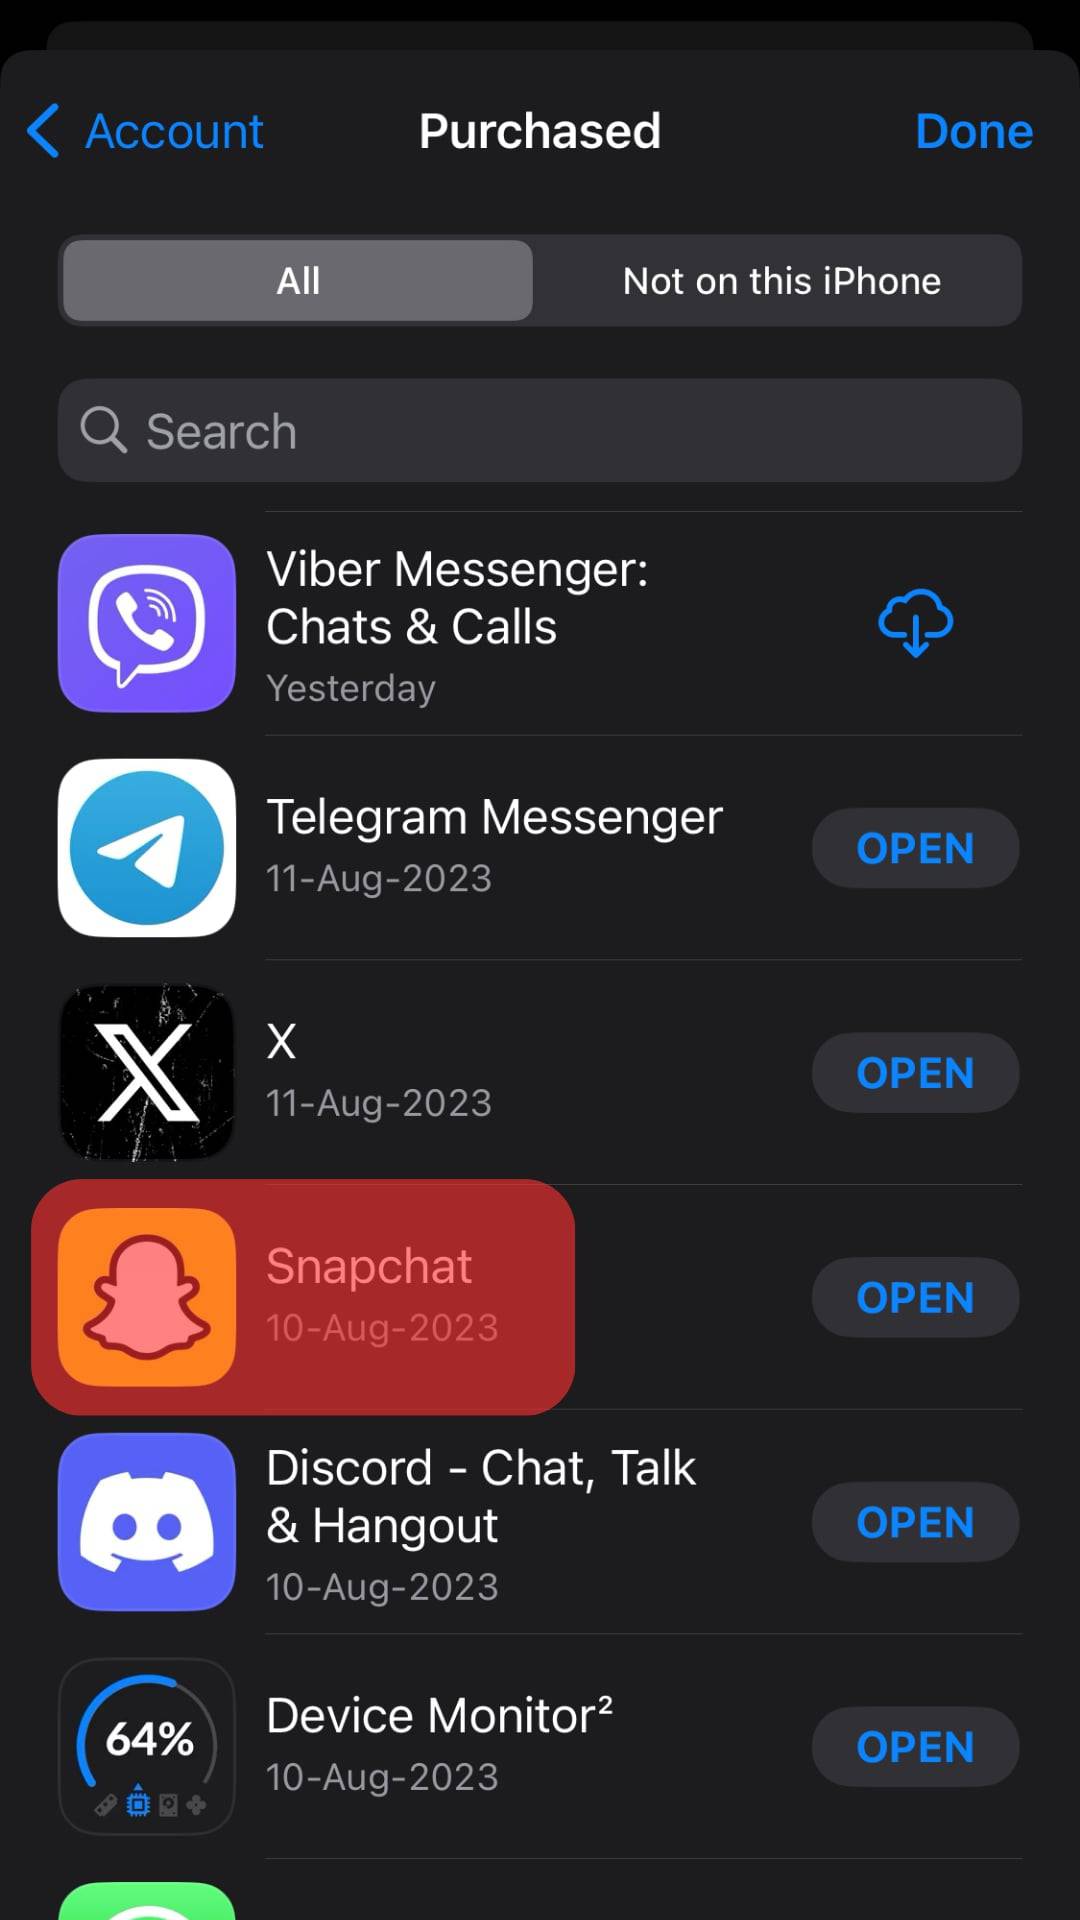 Scroll Down To Snapchat In App Store